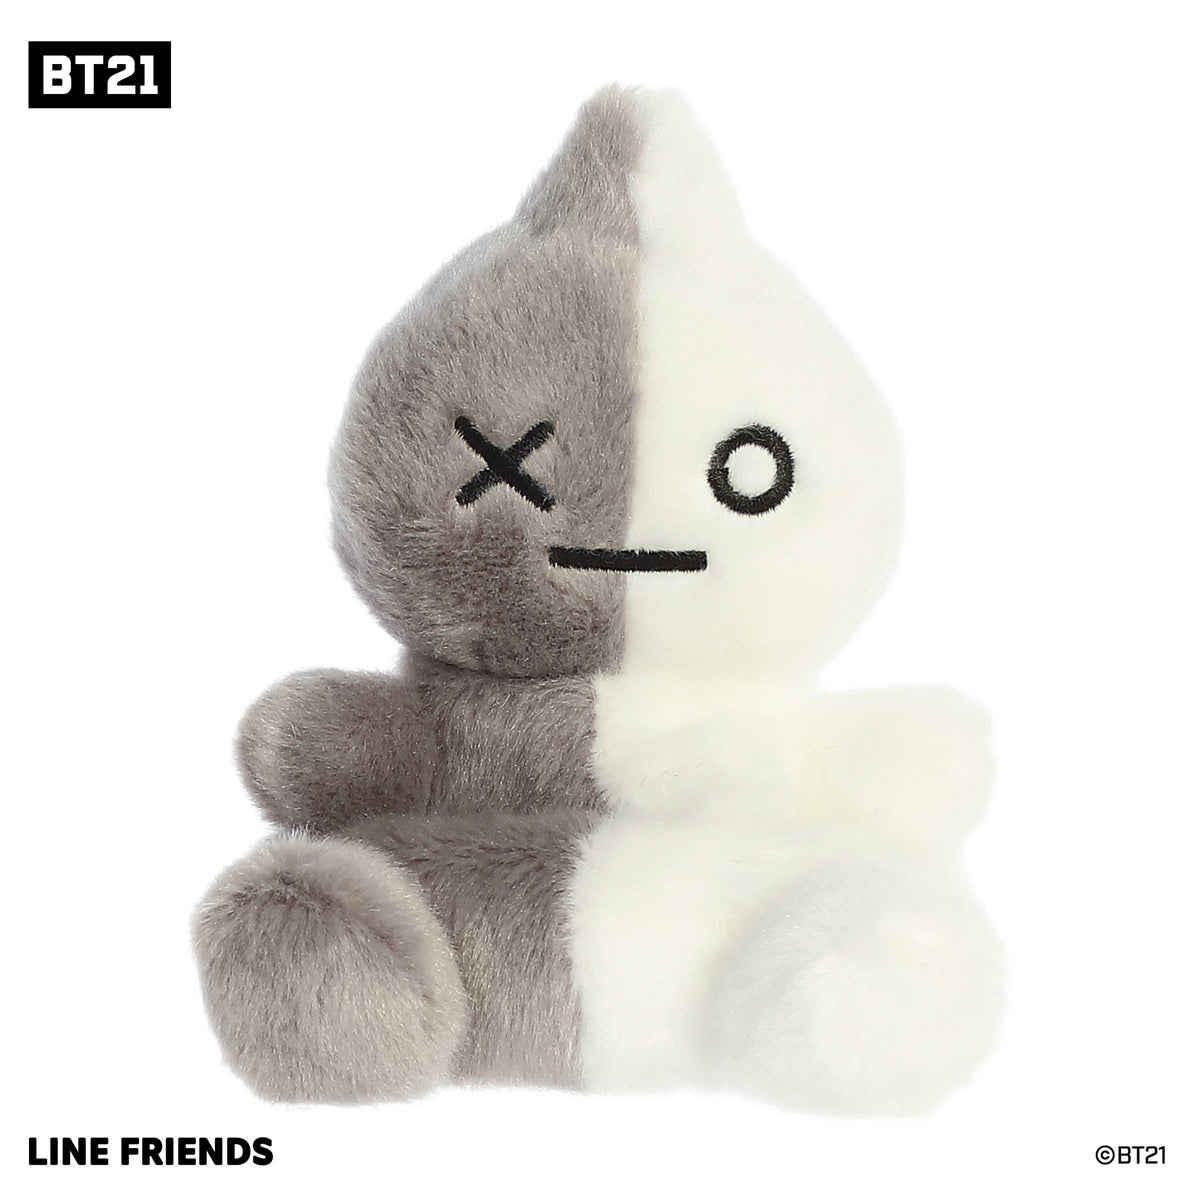 Lovable mini BT21 character plush toy with a fluffy gray and white soft mini body and black embroidery on face.